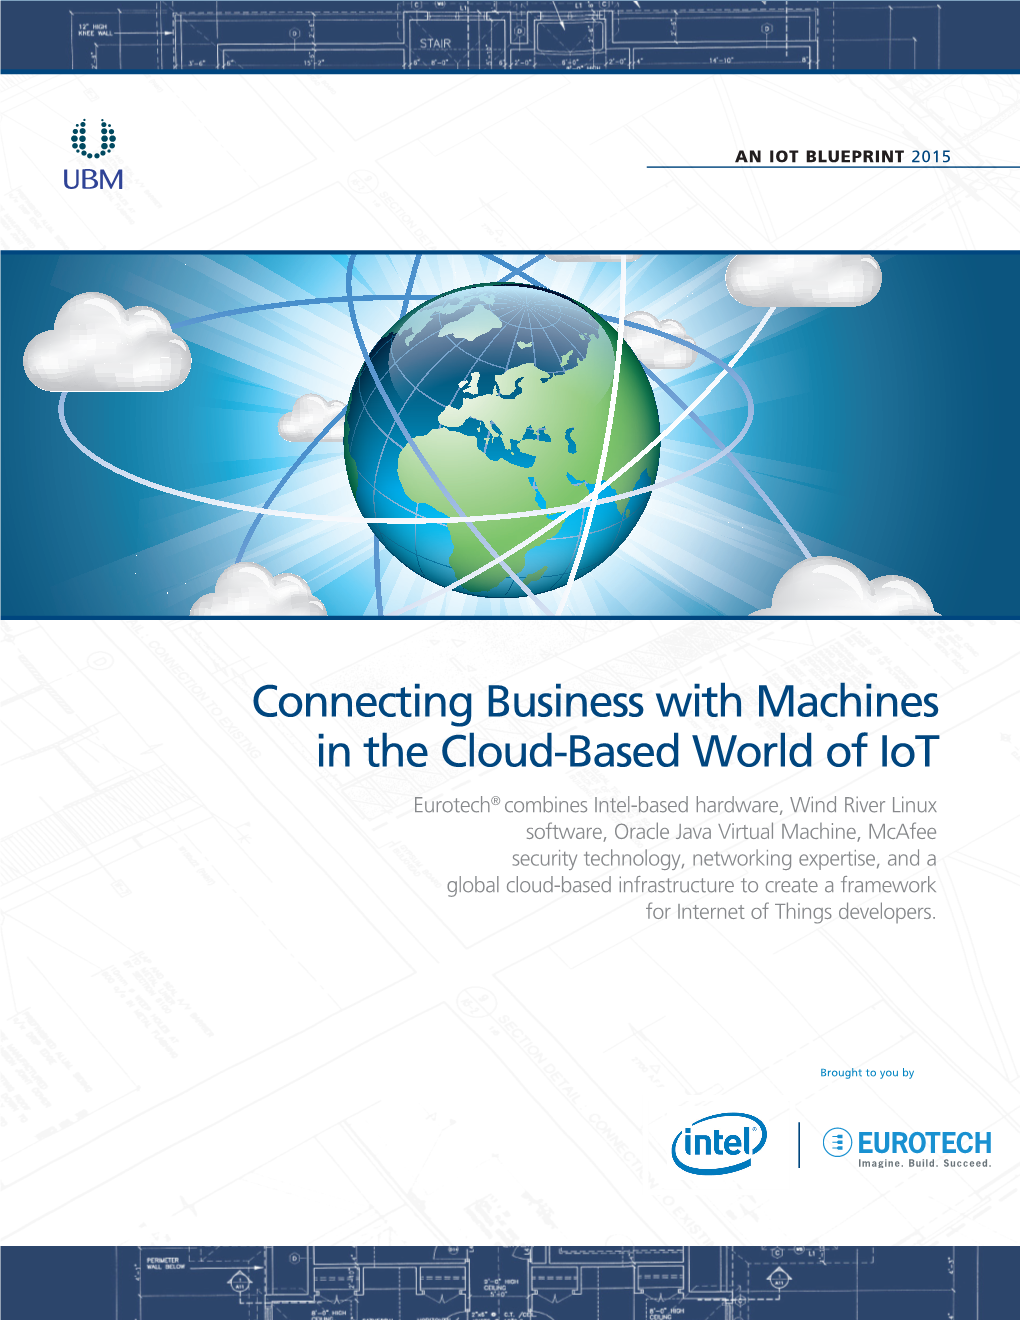 Connecting Business with Machines in the Cloud-Based World Of